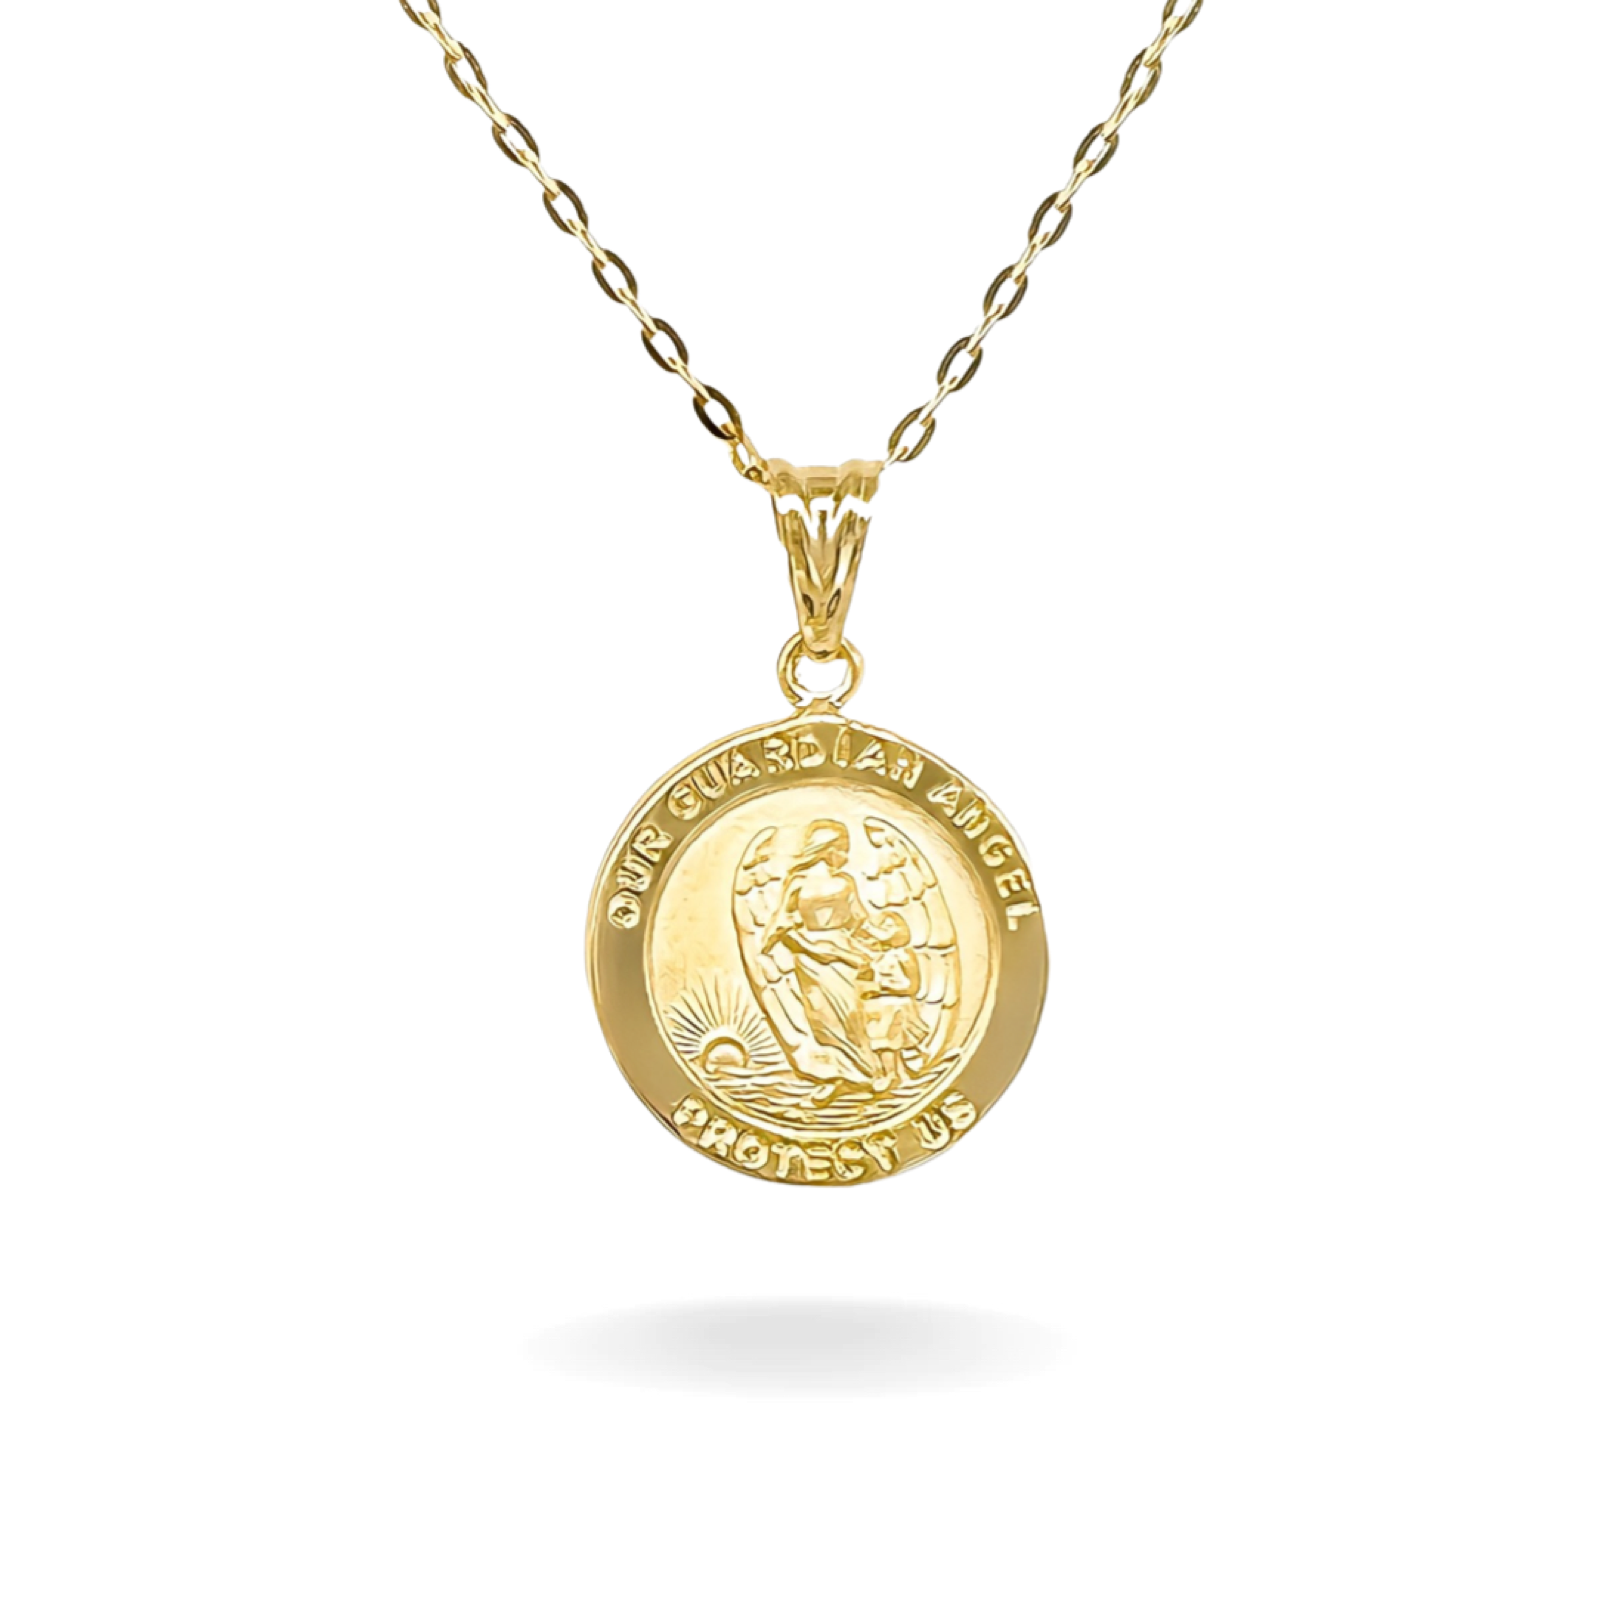 14K YELLOW GOLD GUARDIAN ANGEL PENDANT NECKLACE